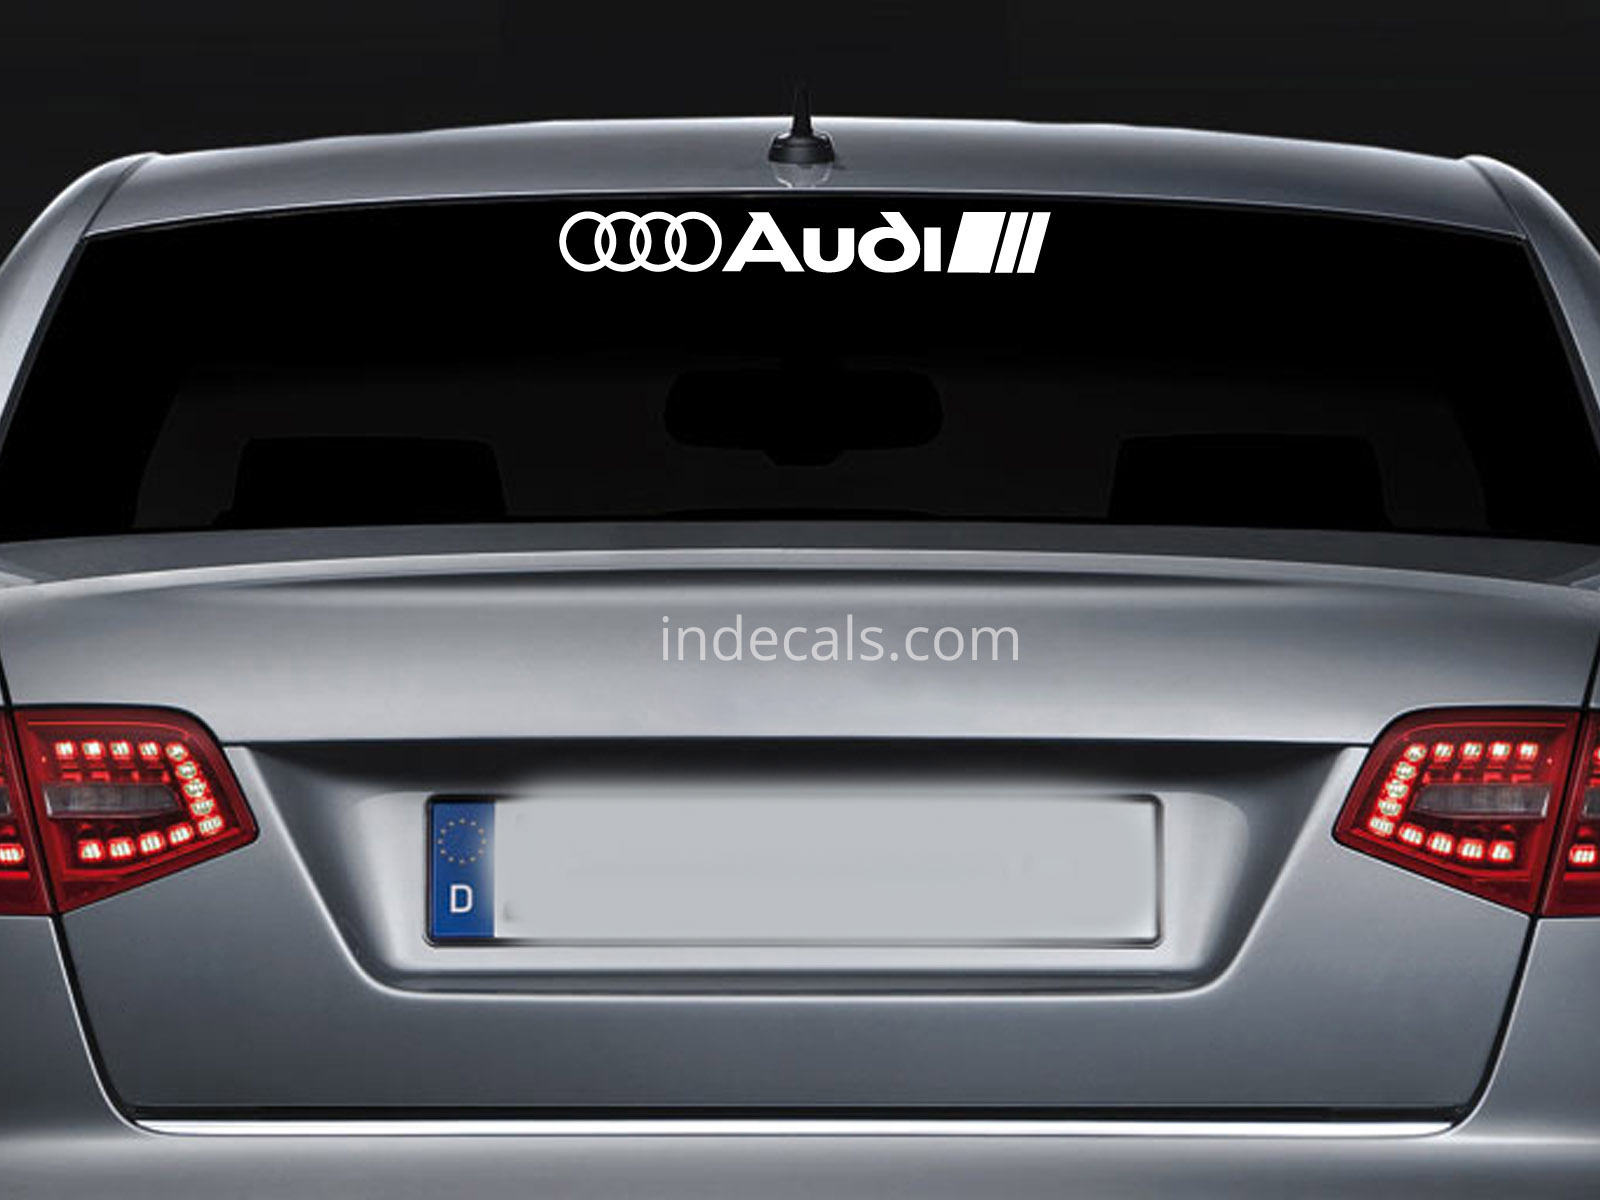 1 x Audi Sticker for Windshield or Back Window - White